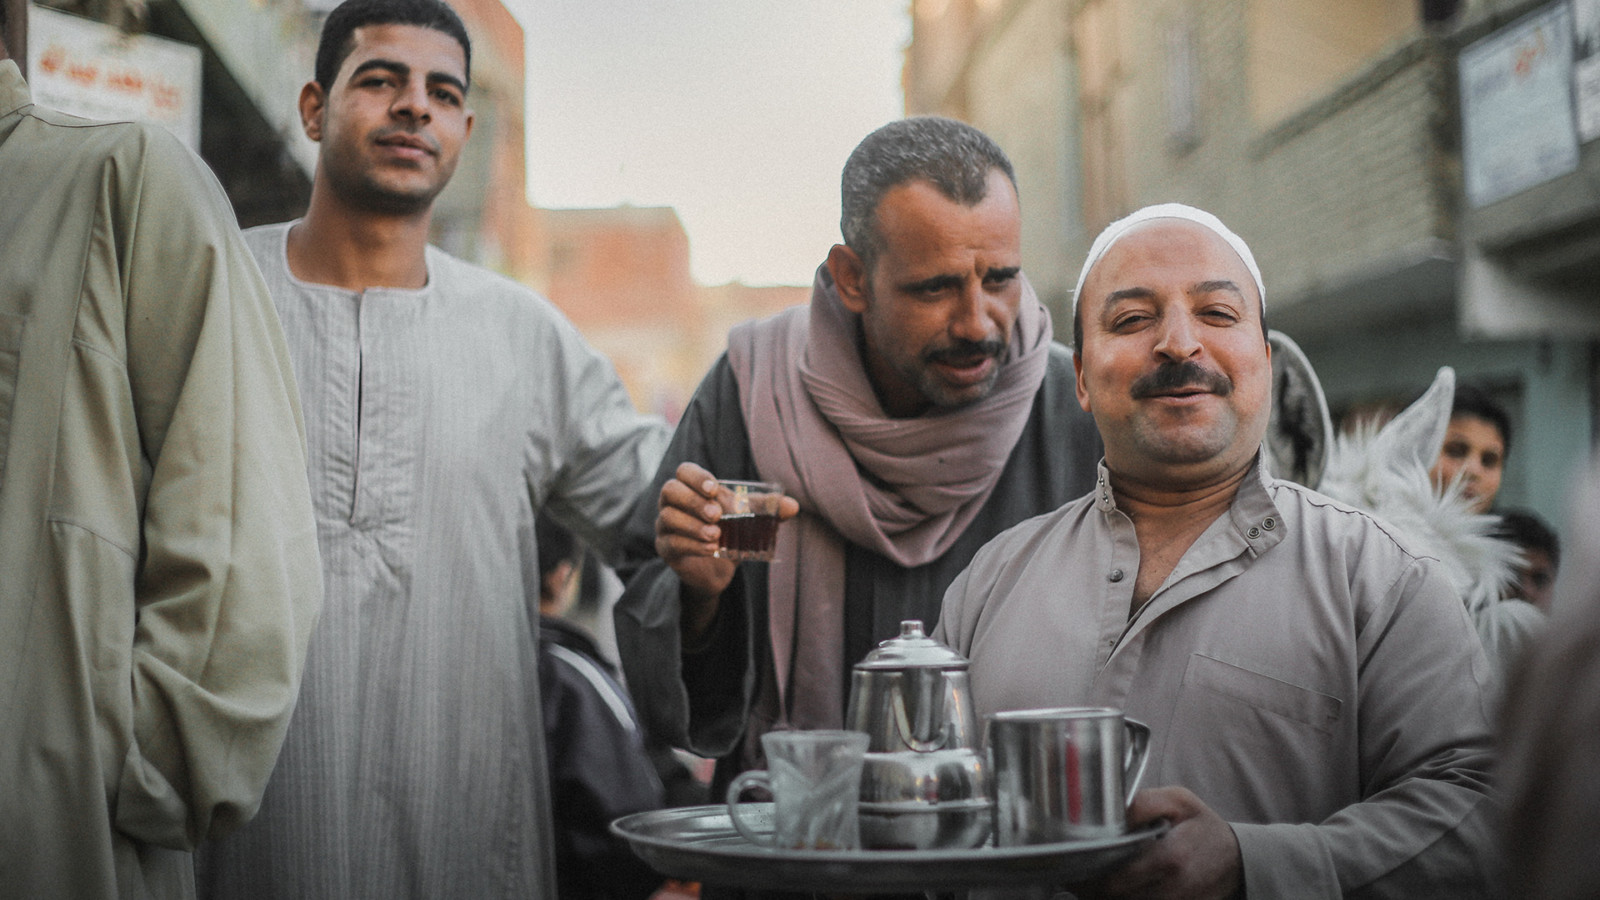 3 men in a crowded street, the man in the foreground is smiling and holding a tray with a silver teapot, a silver jug and a glass mug on it, there is a man holding a glass of what appears to be black tea or coffee and is saying something to the other man. There is a third man in the background looking at the camera candidly.